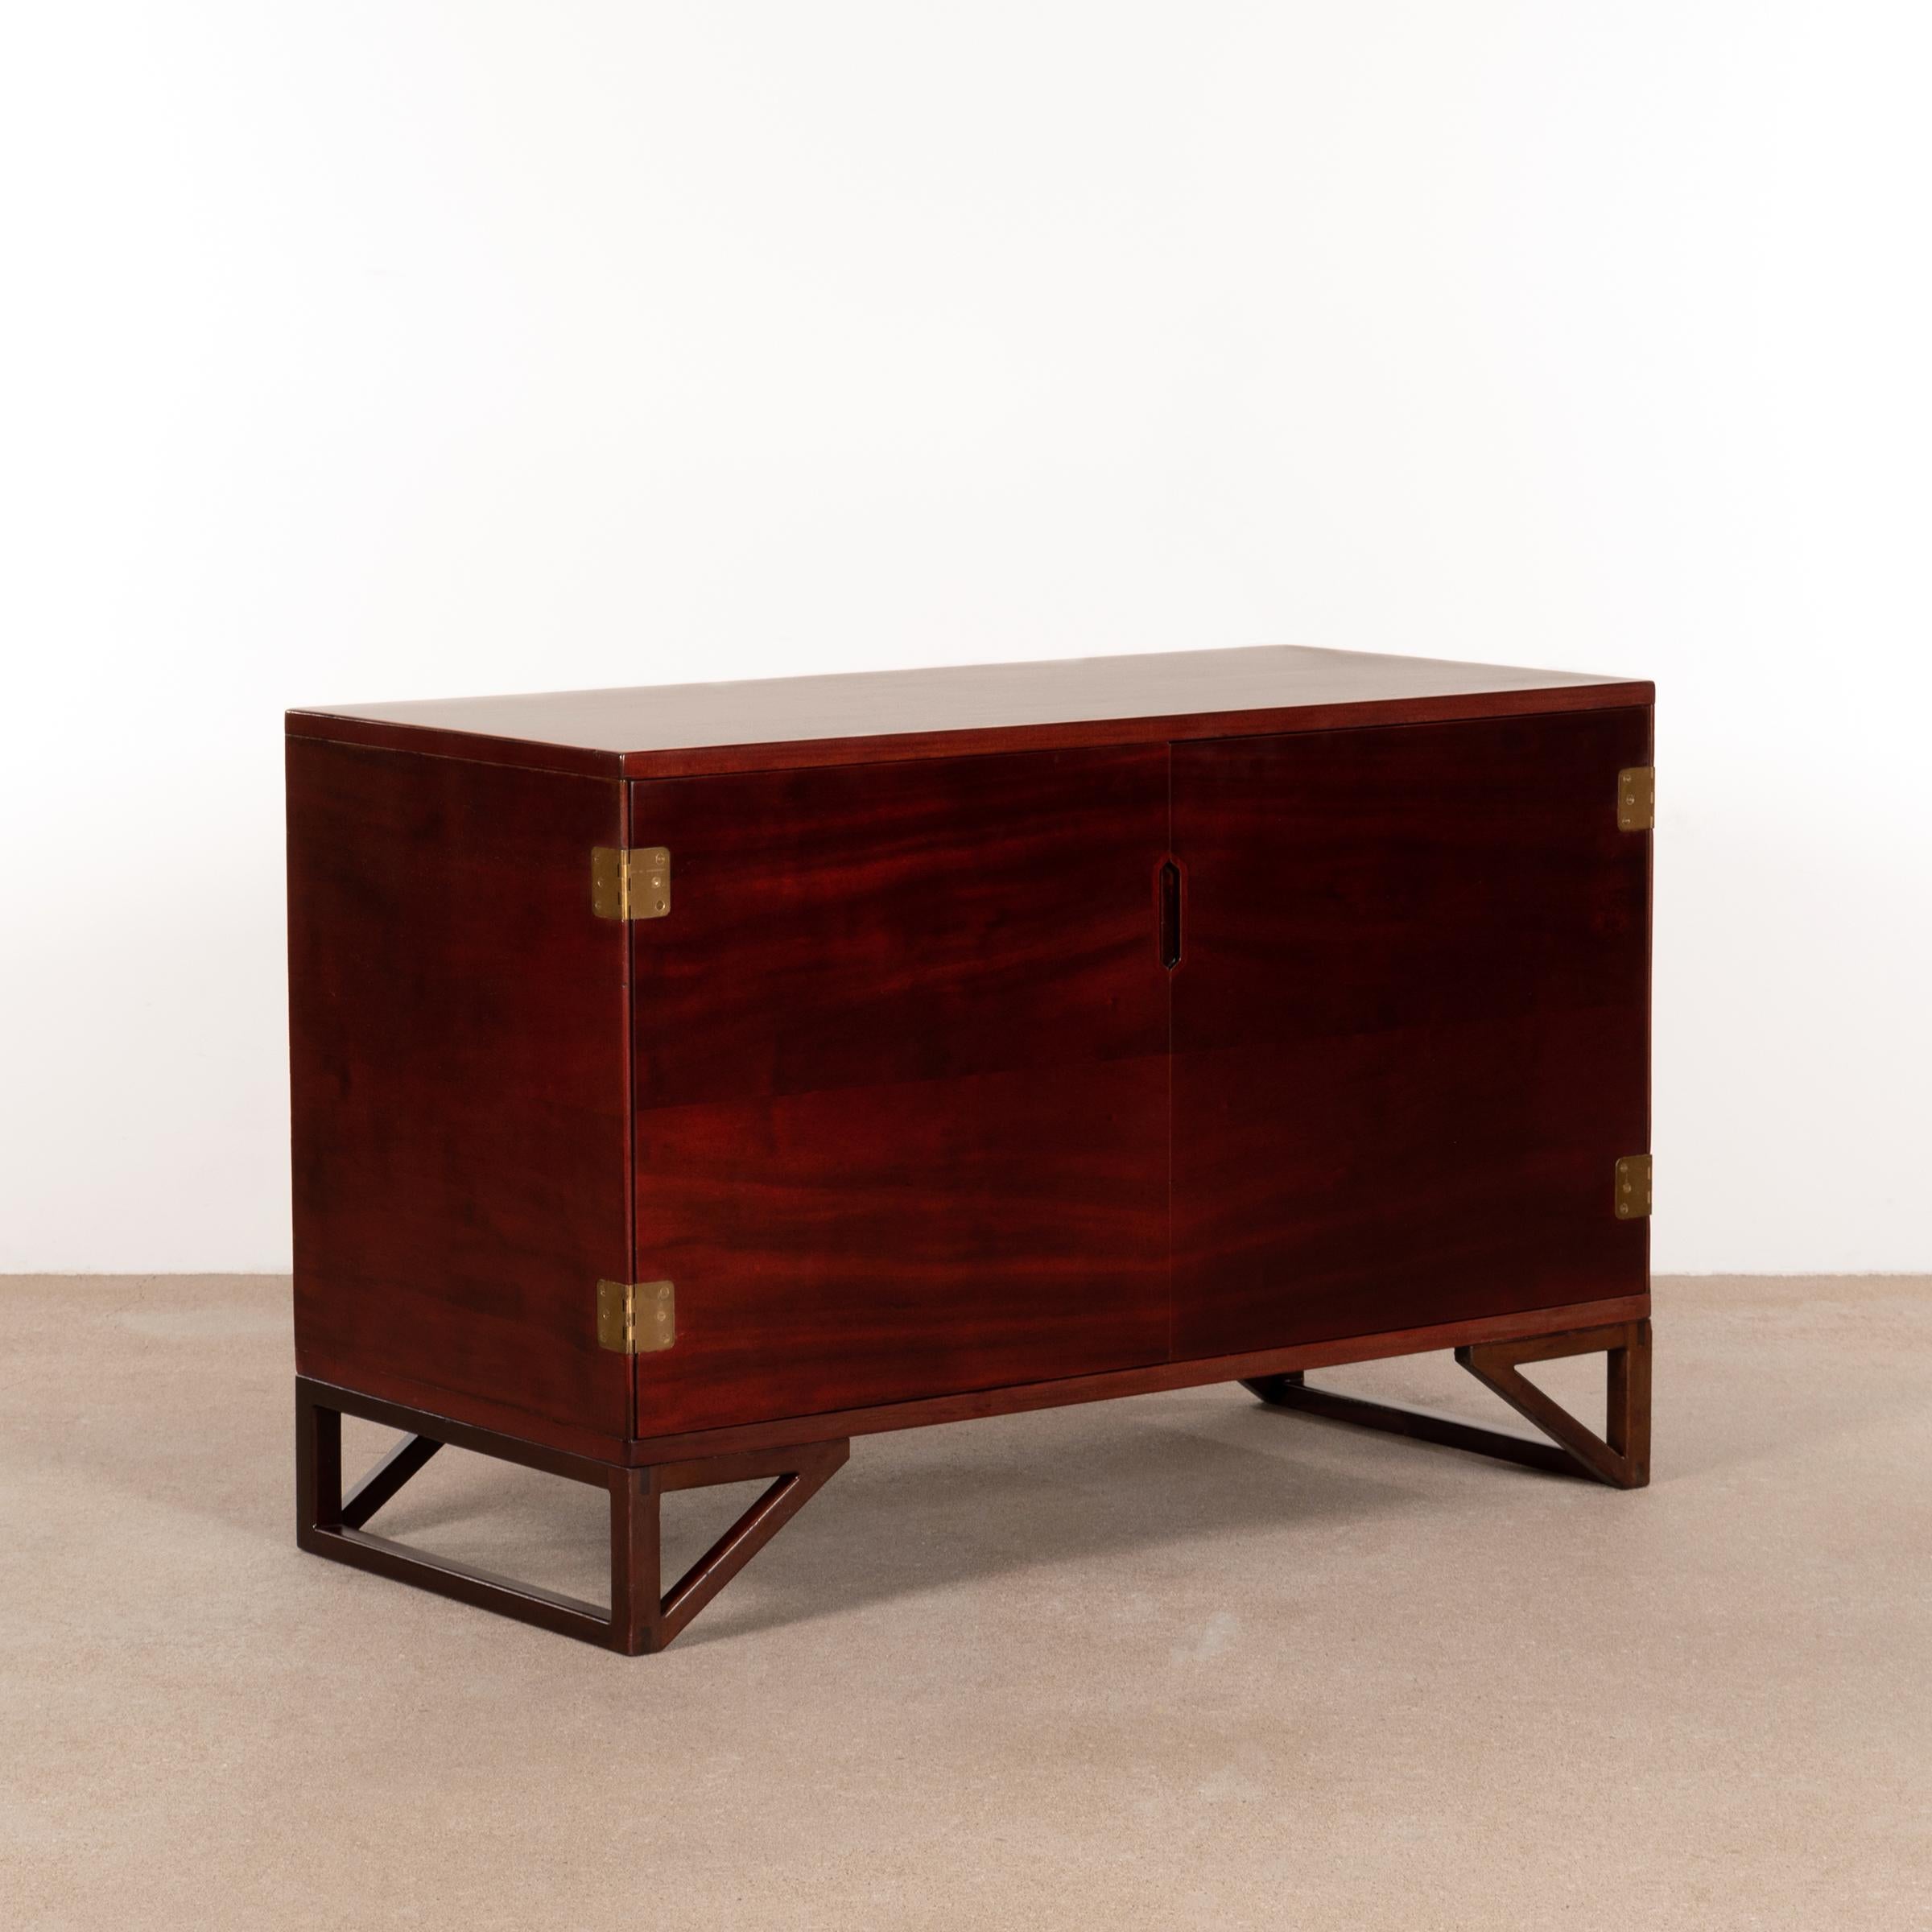 Elegant cabinet by Svend Langkilde by Langkilde Møbler for Illums Bolighus, Denmark. Behind the two doors are four drawers and one shelf. Mahogany veneer and brass hinges. The cabinet has beautiful details and displays great craftmanship. All in